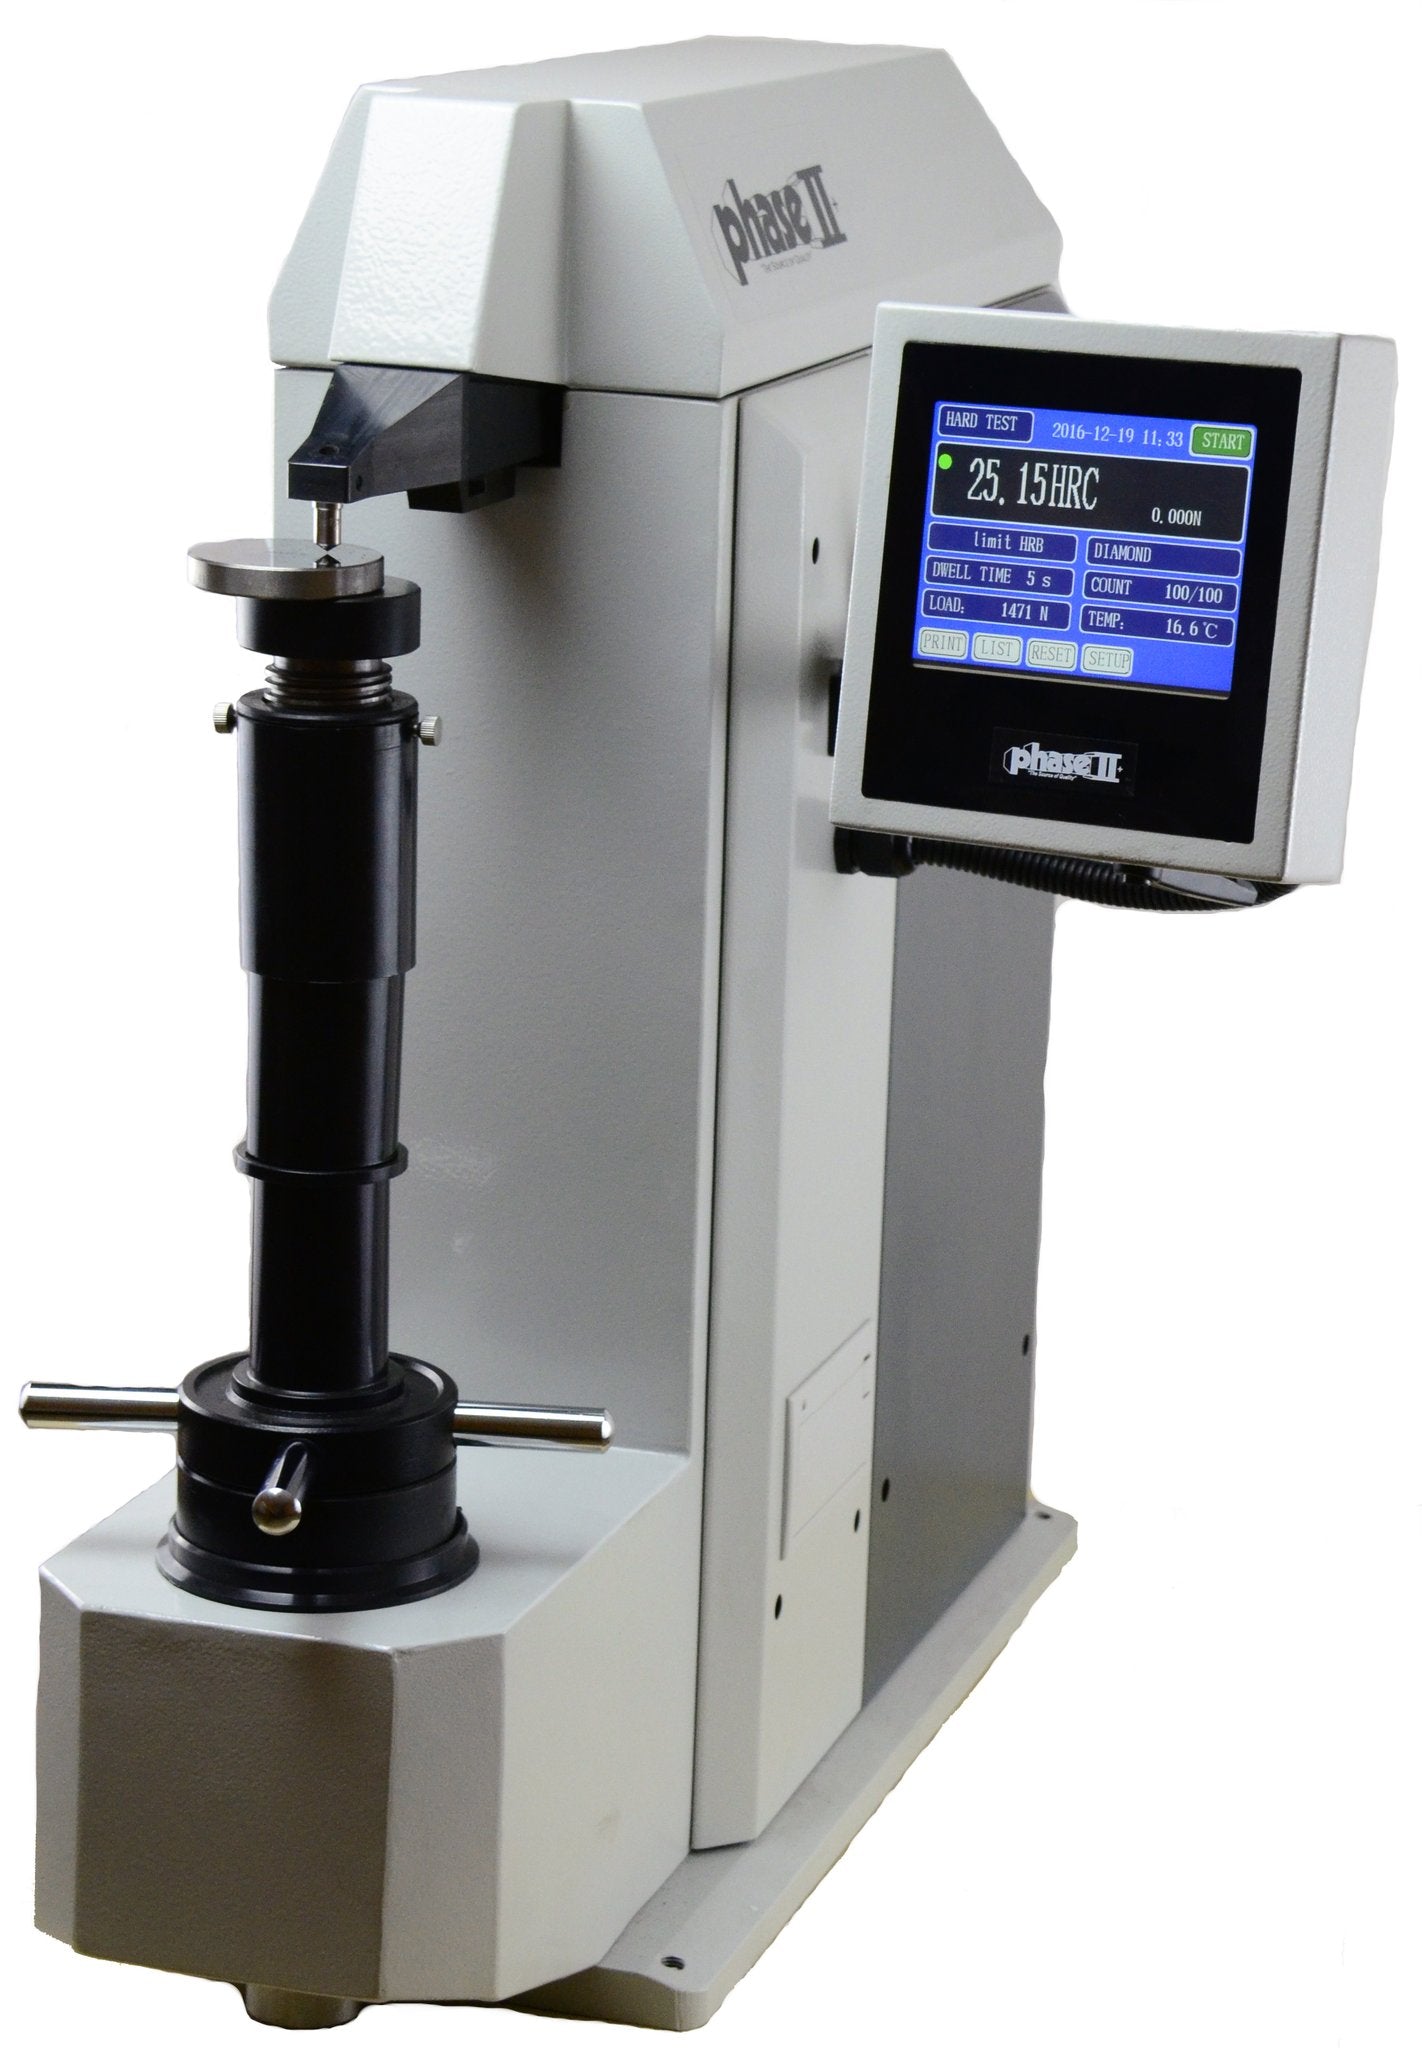 Rockwell Hardness Testers In Stock And Ready To Ship Westport Corp 4700